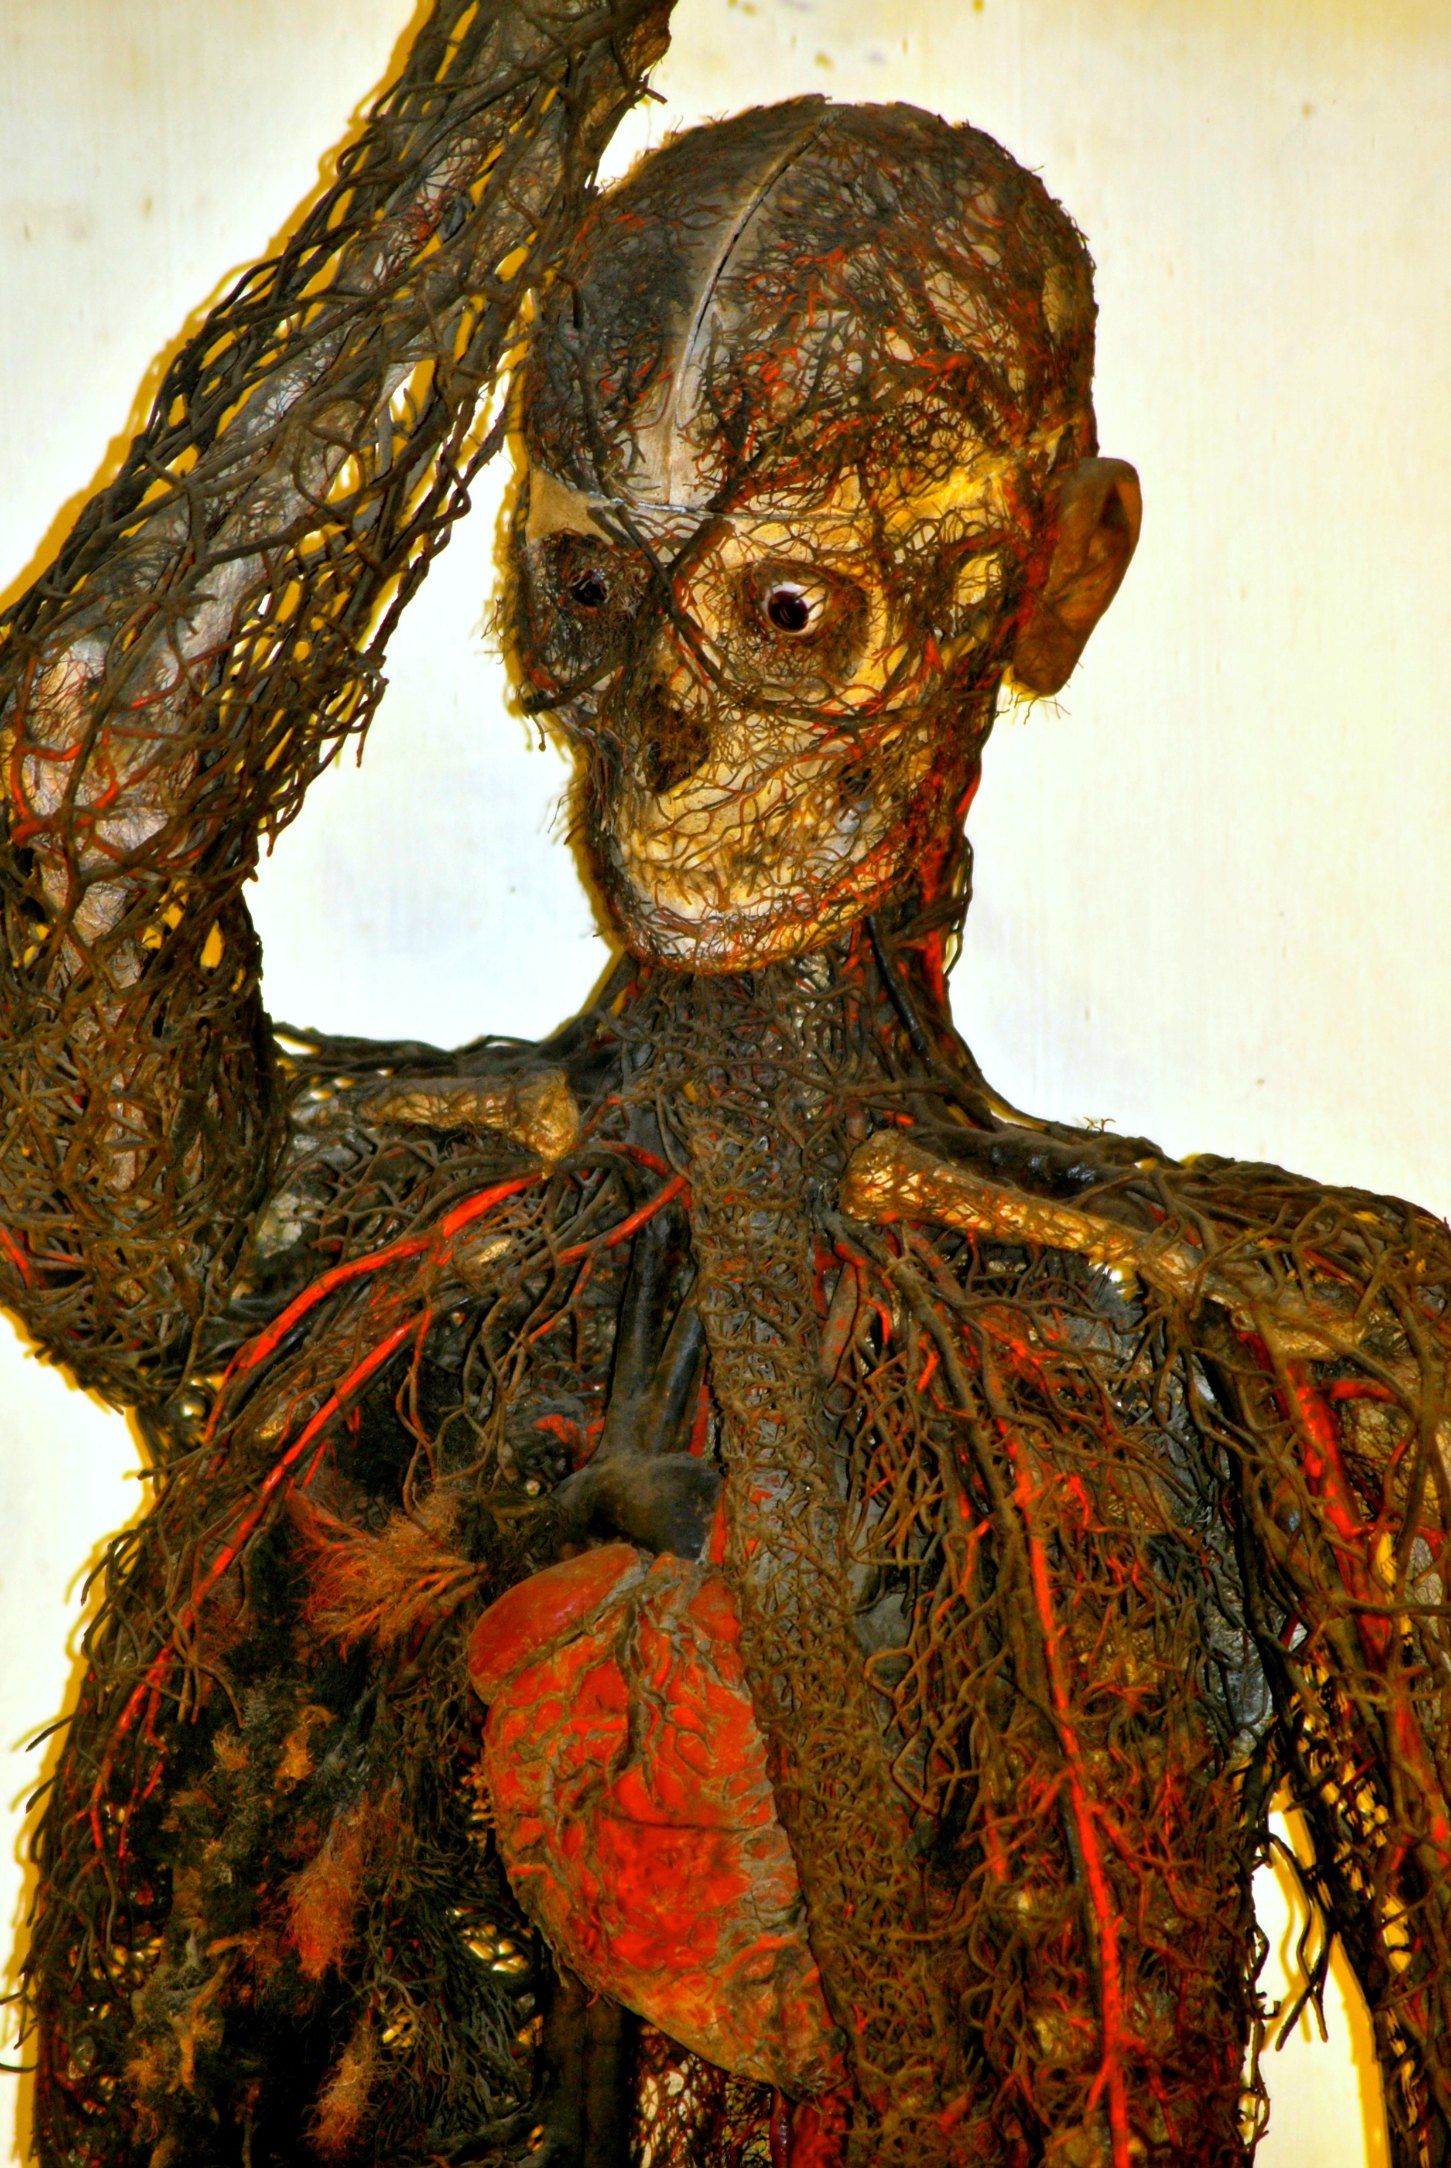 This beautiful sculpture actually used to be a human being! Using unknown methods, 18th century anatomist Giuseppe Salerno perfectly preserved a human nervous system to be displayed at the Cappella Sansevero in Naples. Look at that - that's what's inside you! All those gross wires and strings and blobs are what allow you to move your hands and click on my articles and absorb them. DISGUSTING